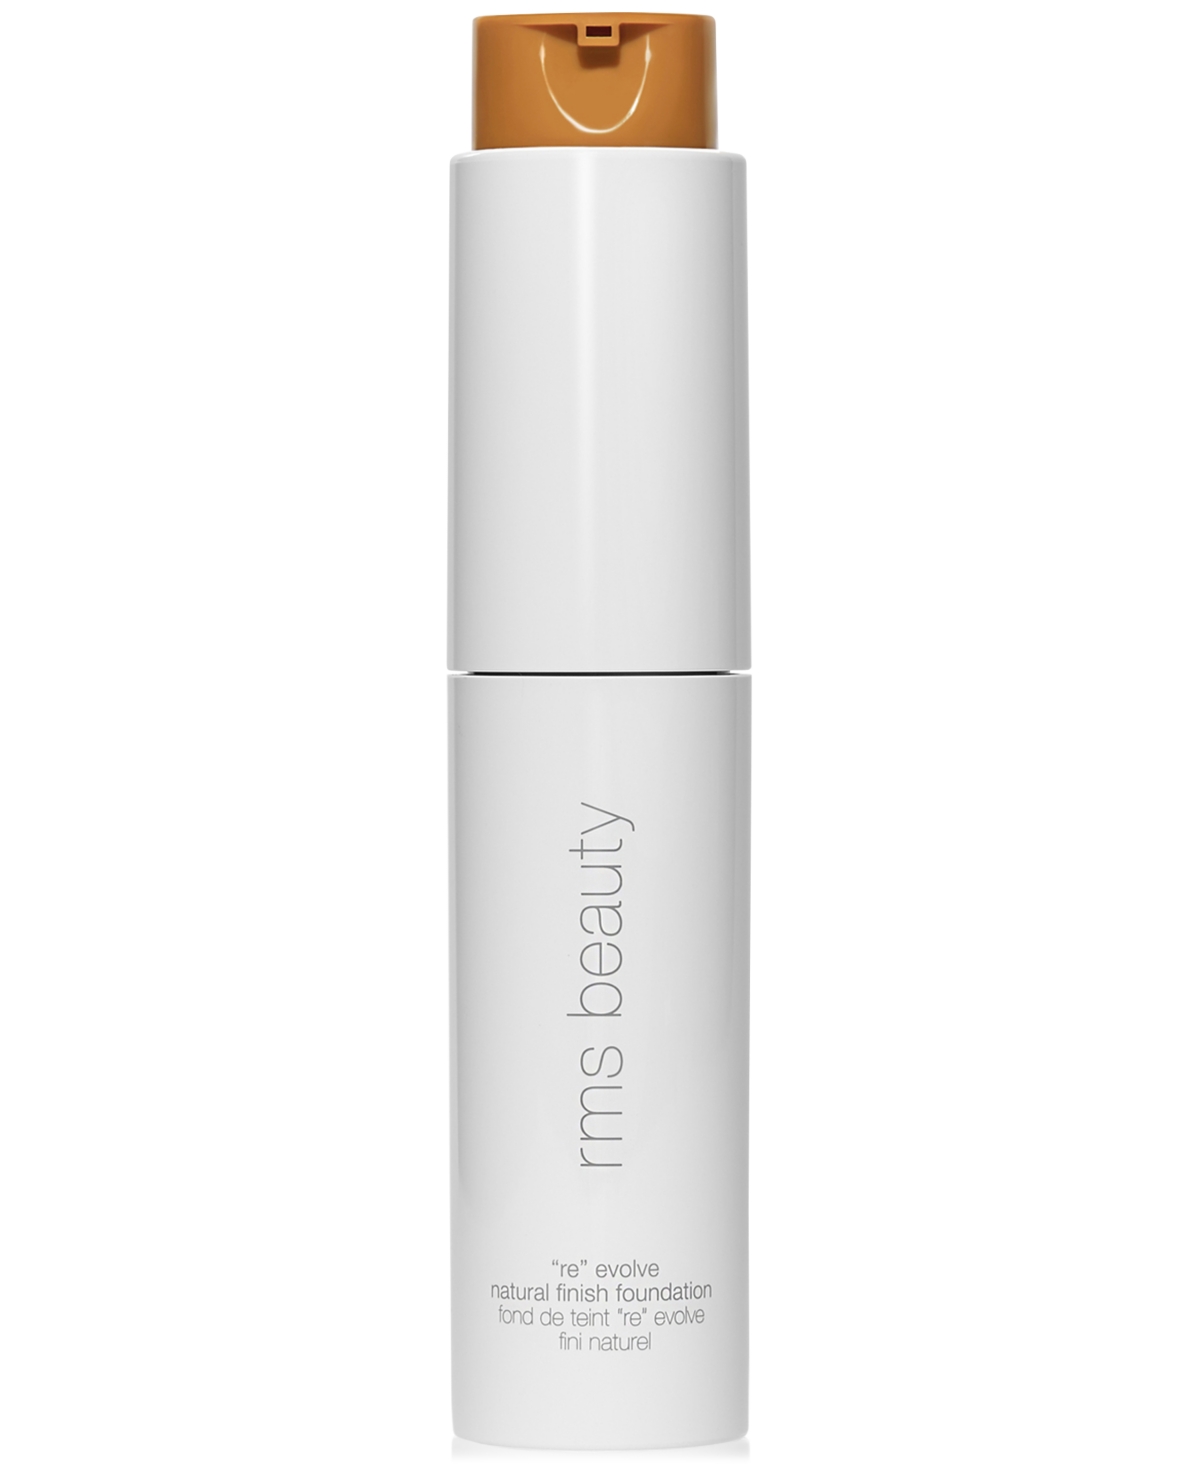 Rms Beauty Reevolve Natural Finish Foundation In Golden Sienna